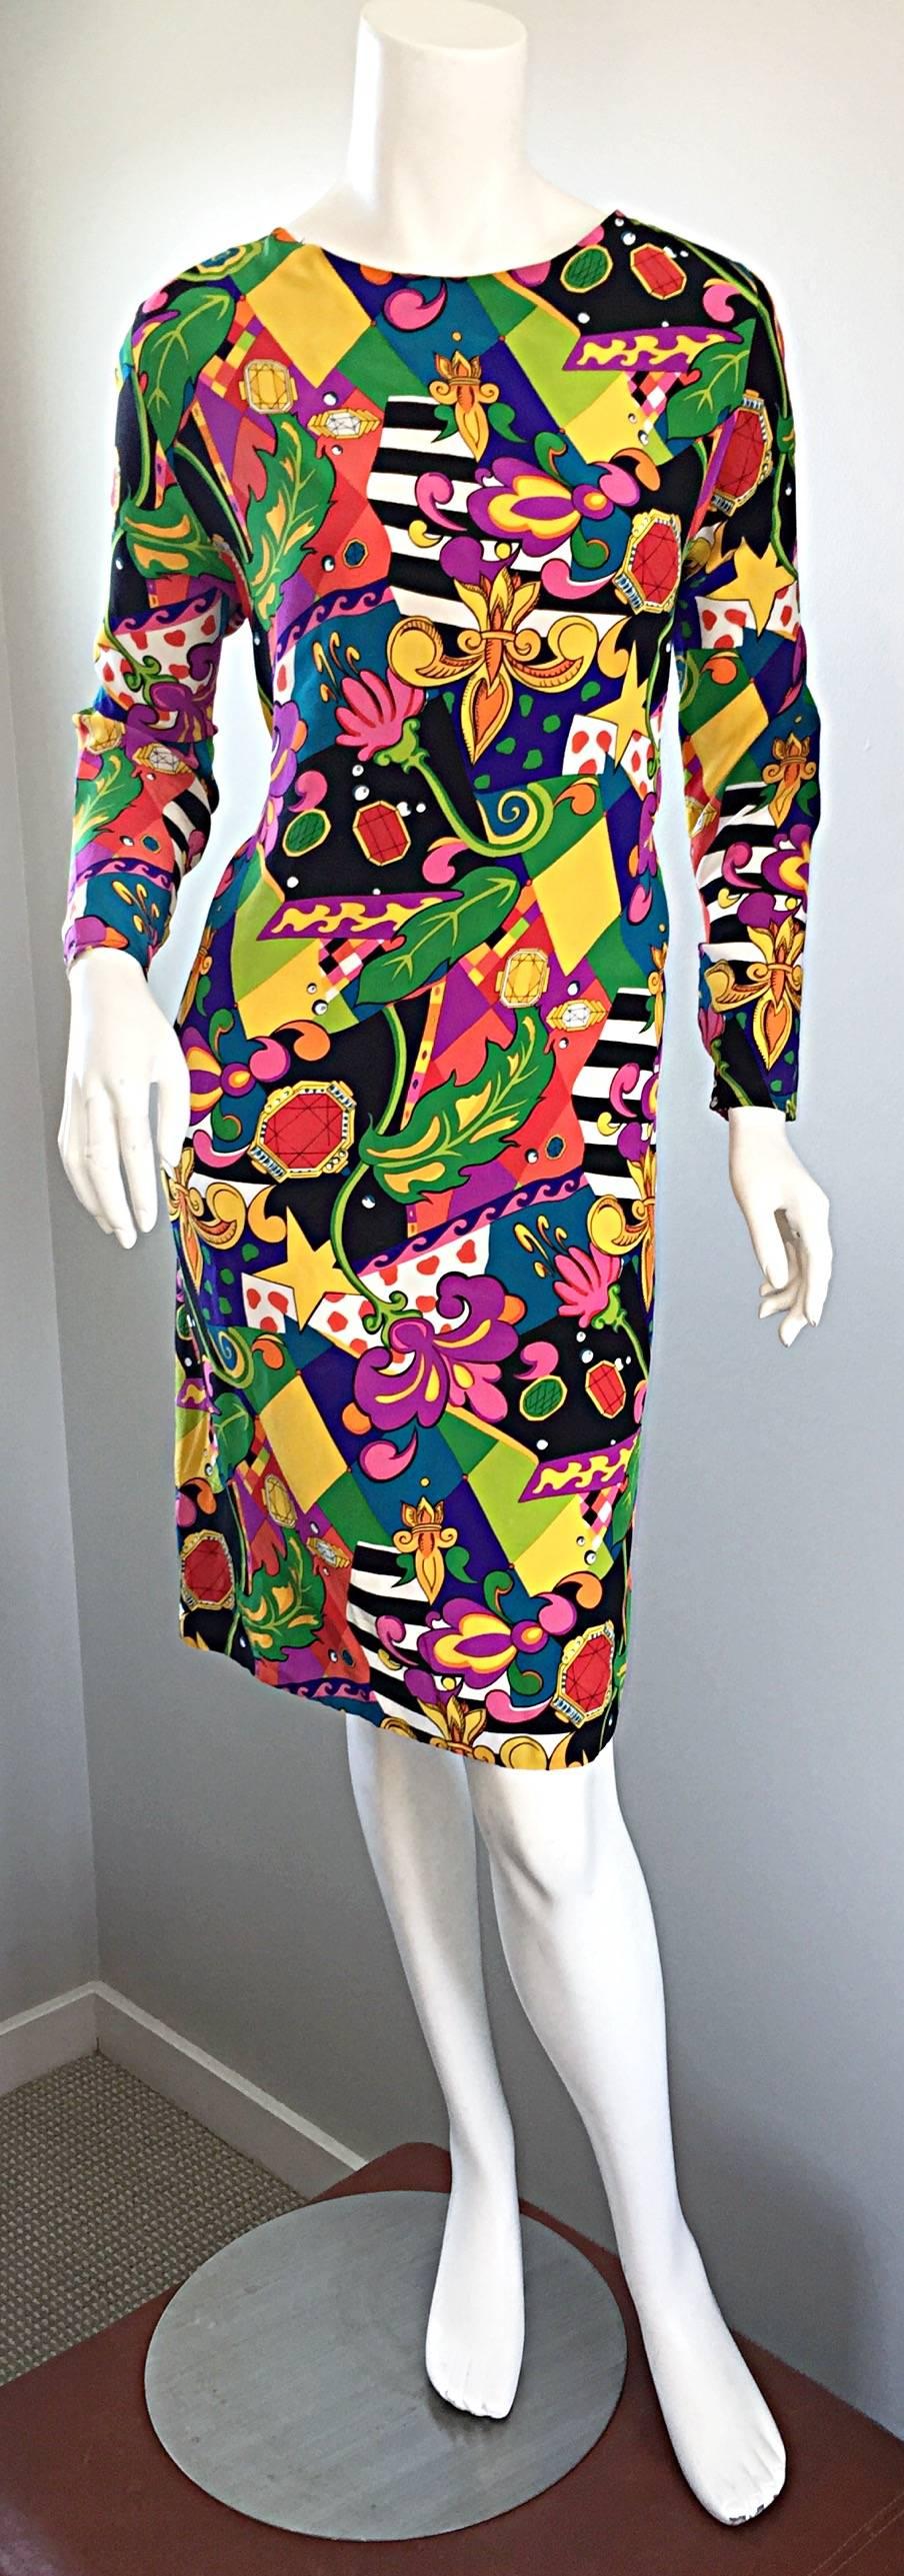 Amazing vintage I. Magnin silk printed dress! Multi layered prints of jewels, stars, fleur de lys, flowers, playing cards, stripes, harlequins, leaves, etc.!!! Slimming fit, that is perfect for a variety of occasions. Looks great alone, or belted.